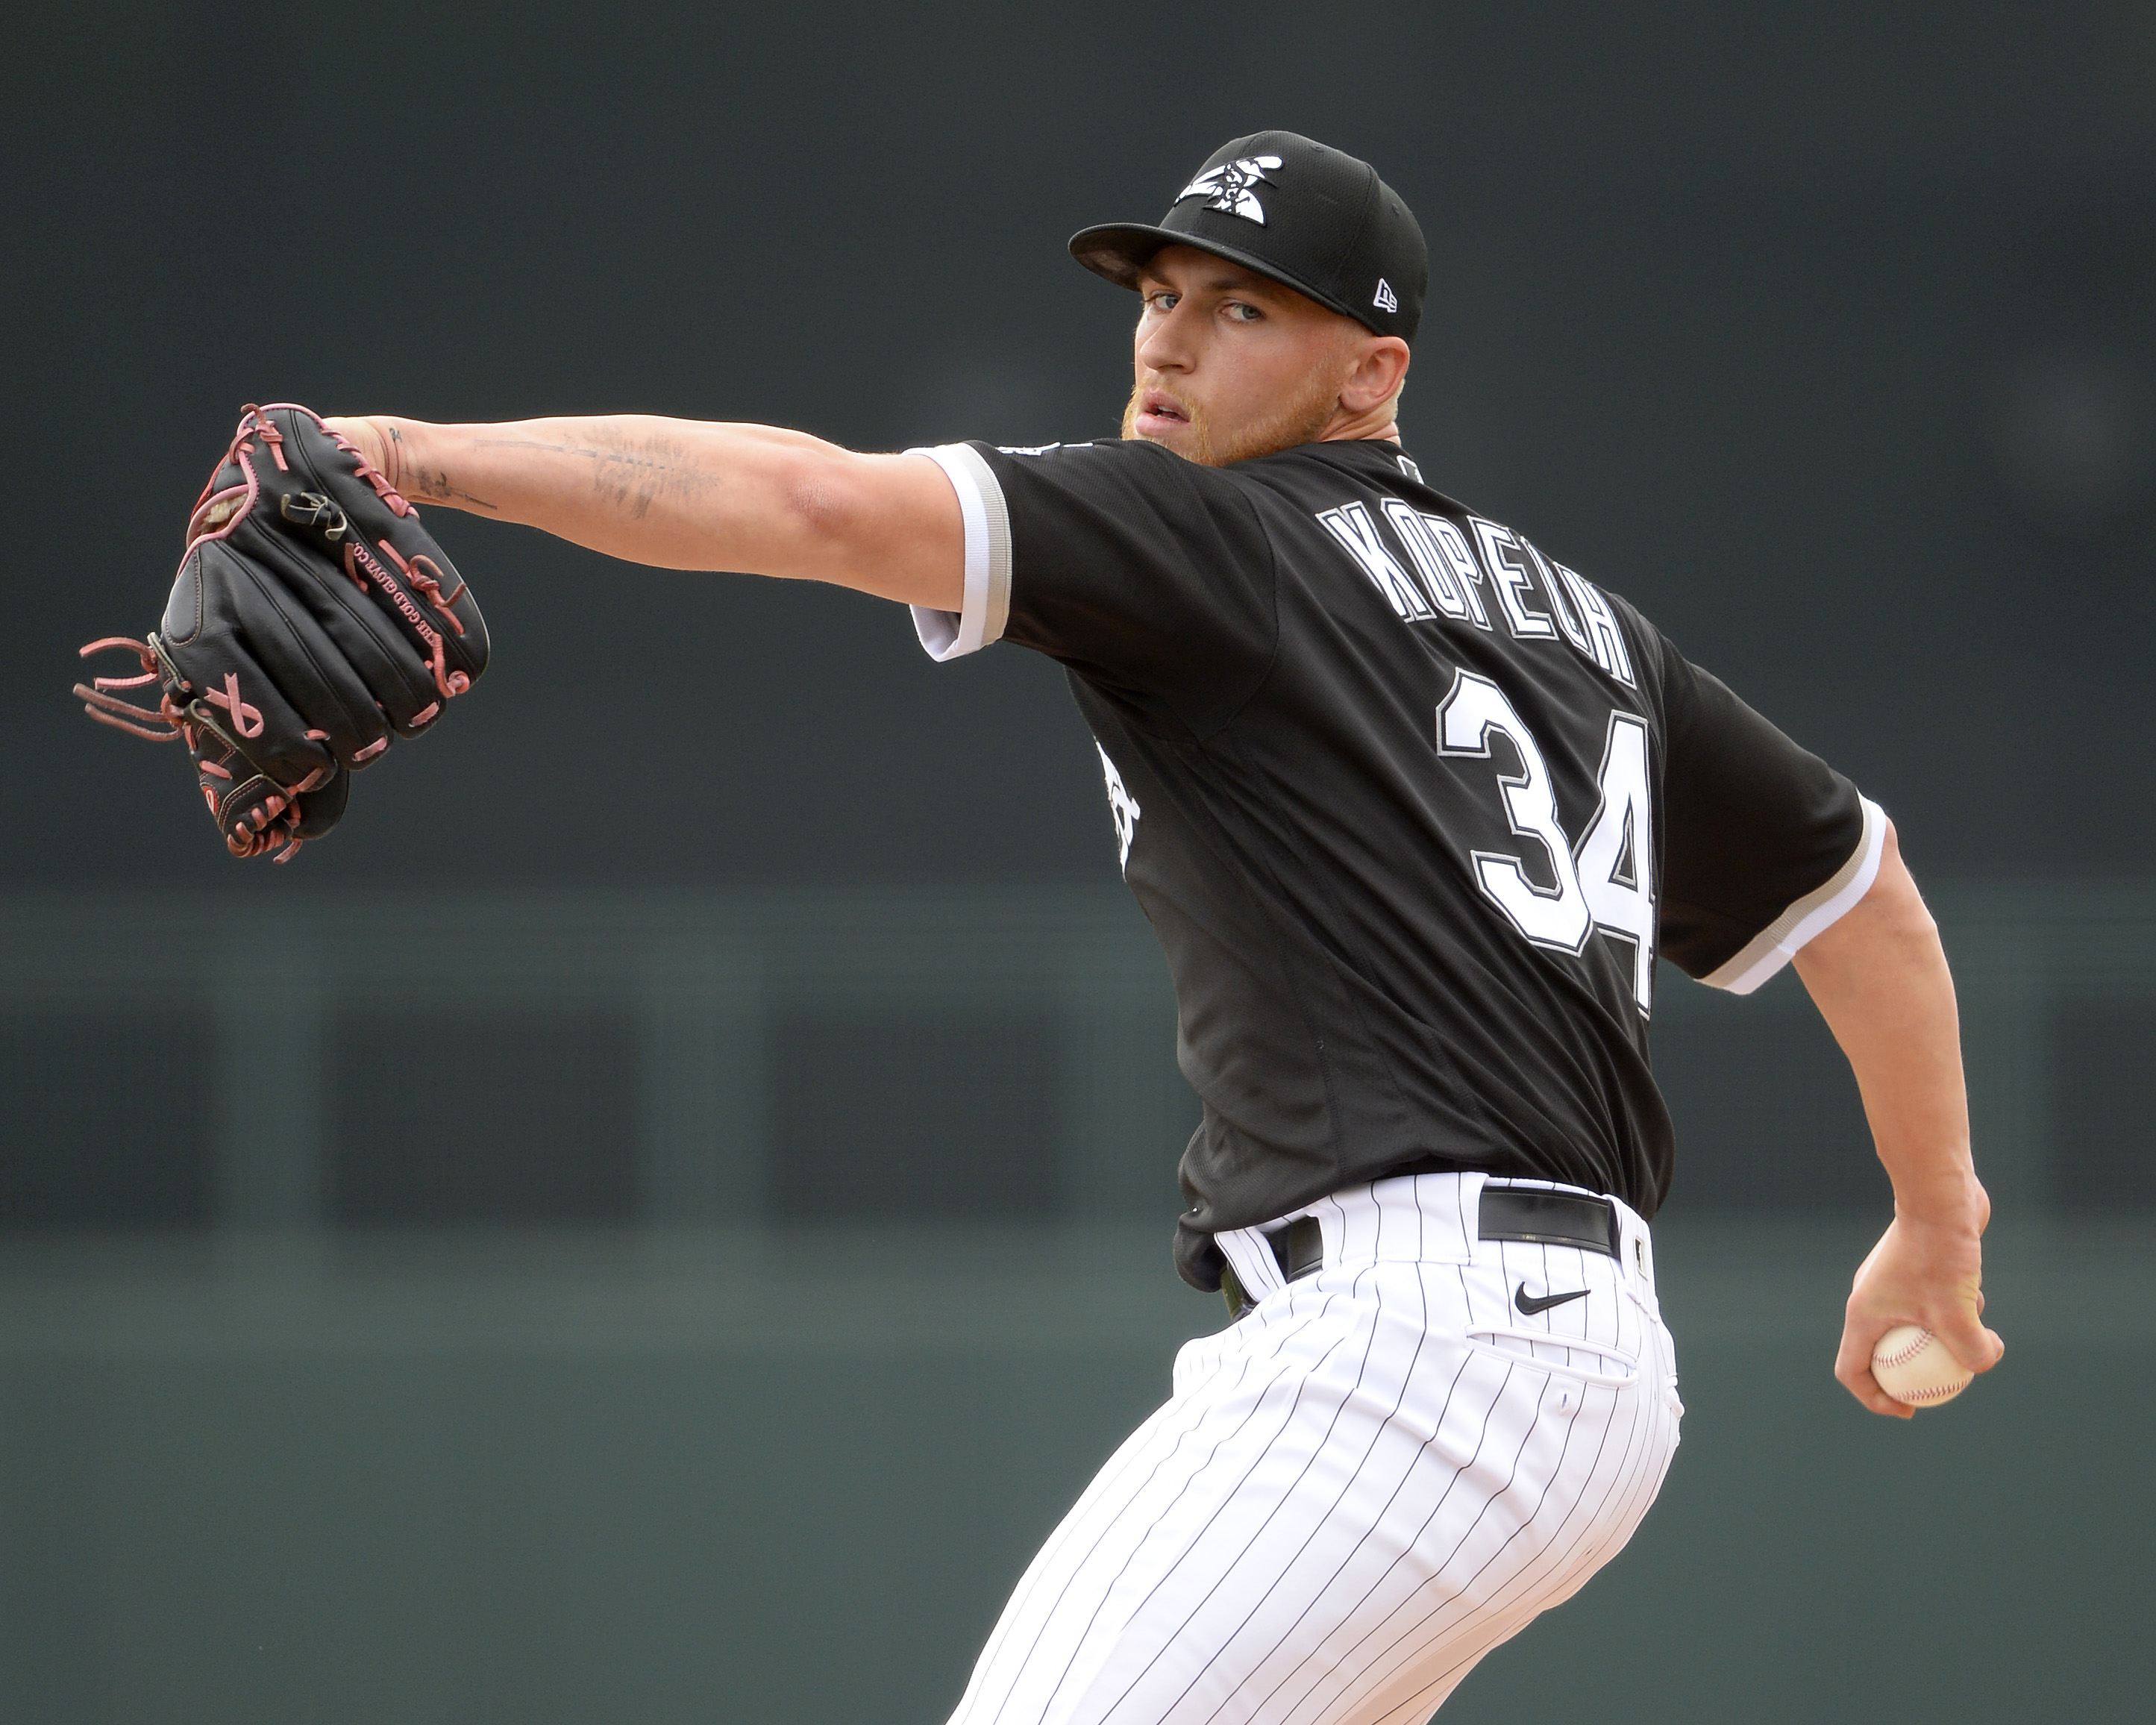 Is White Sox Pitcher Michael Kopech’s Mental Health Cause for Concern as Coach Suggests?